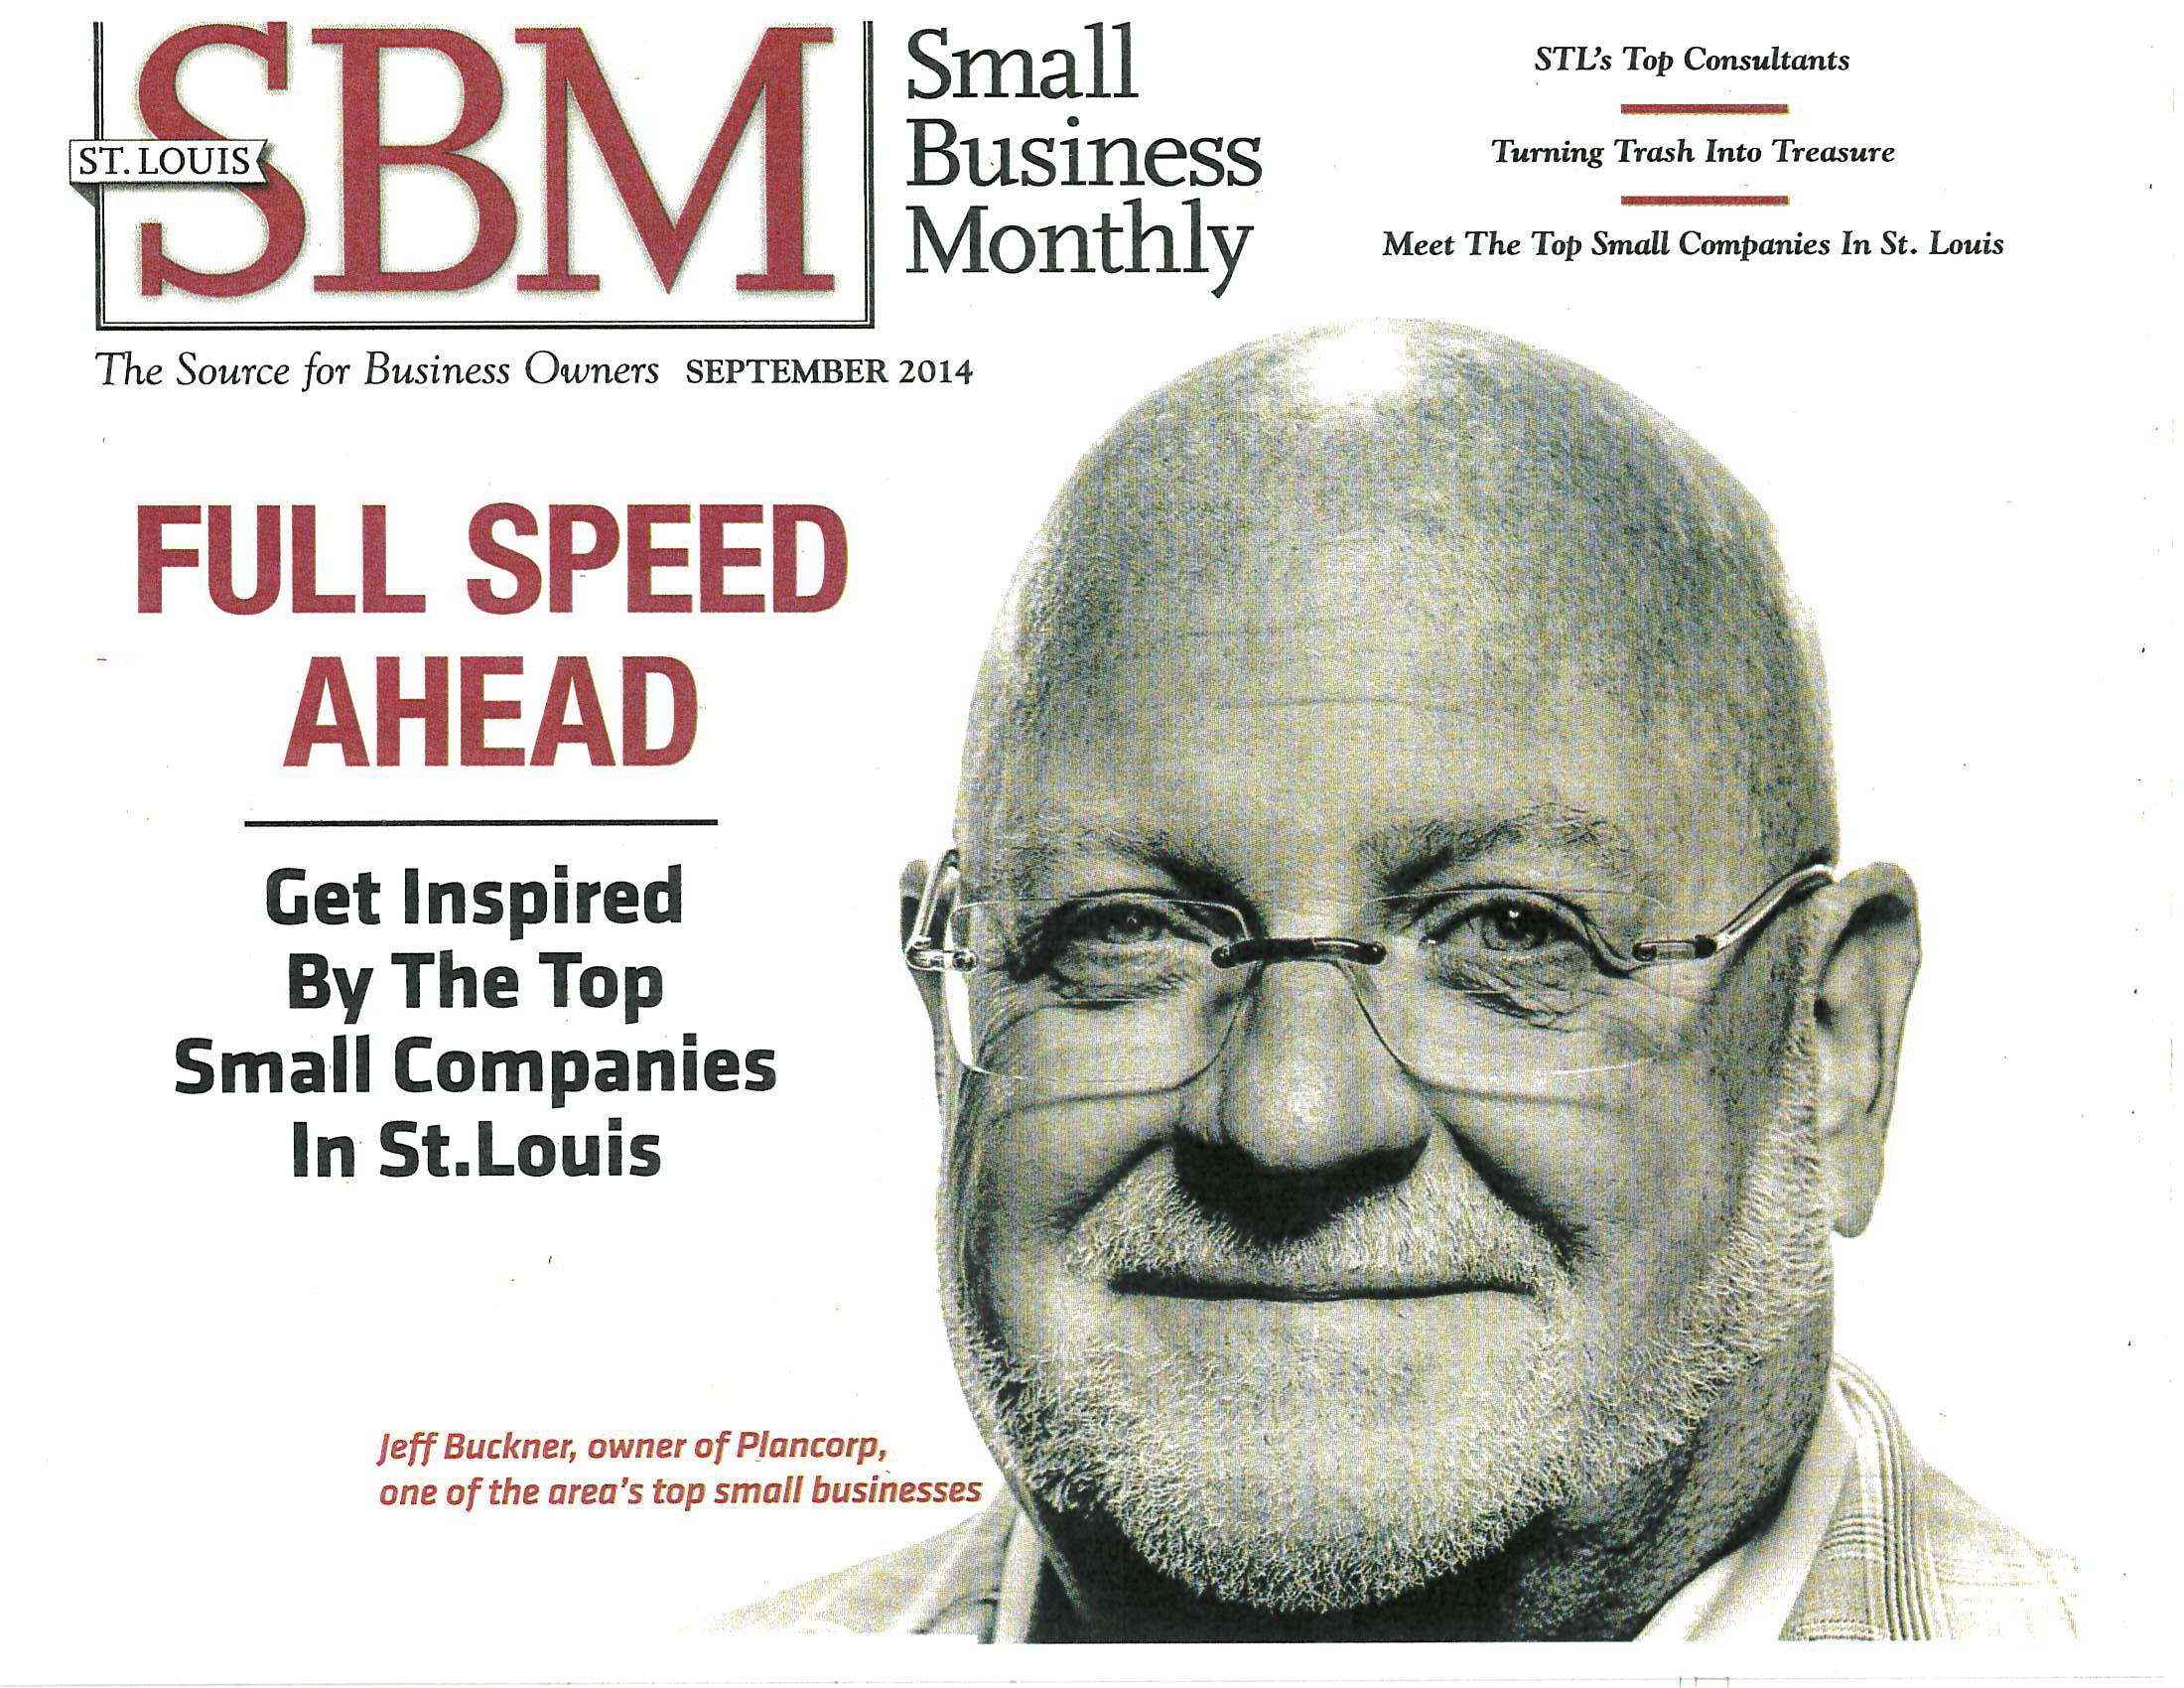 St. Louis Small Business Monthly Cover